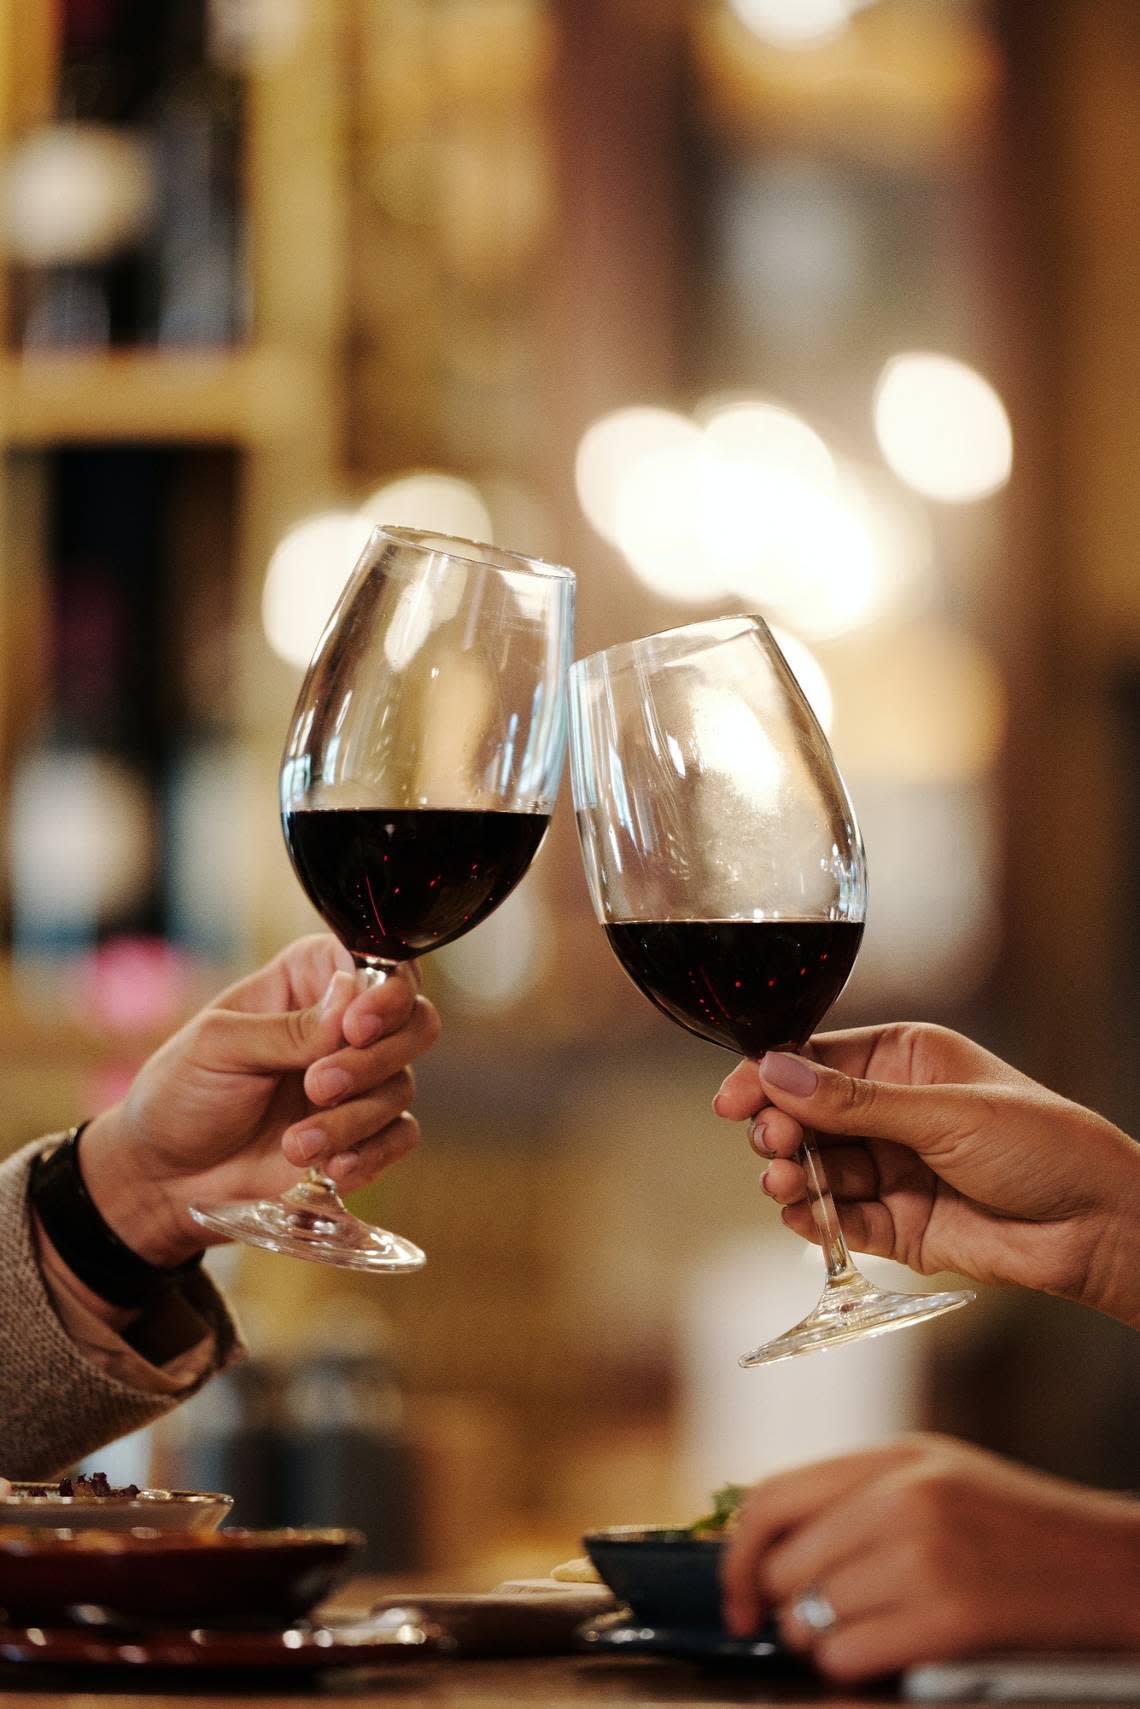 The Idaho Wine Commission has organized four select Winter Wine Weekends through March this year. The second one, “Dessert First,” is Feb. 4 and 5.